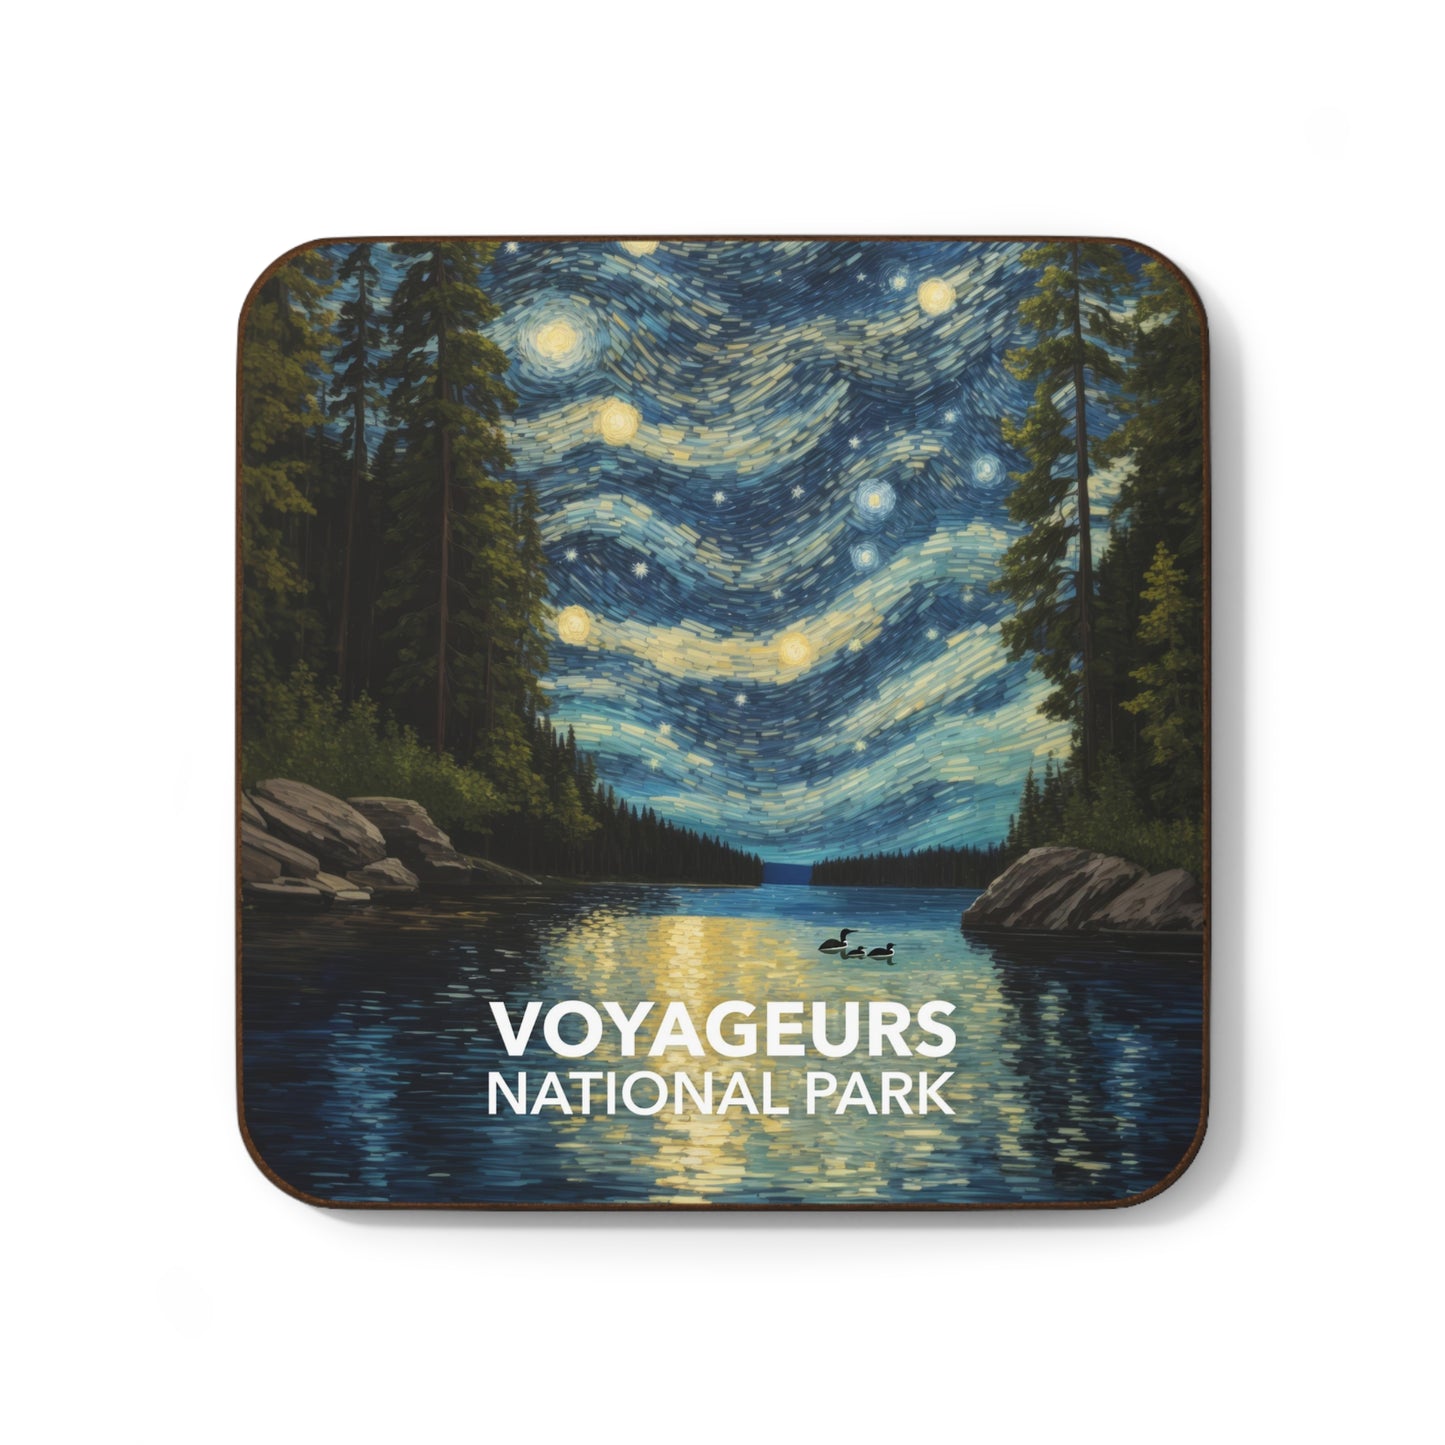 Voyageurs National Park Coaster - The Starry Night